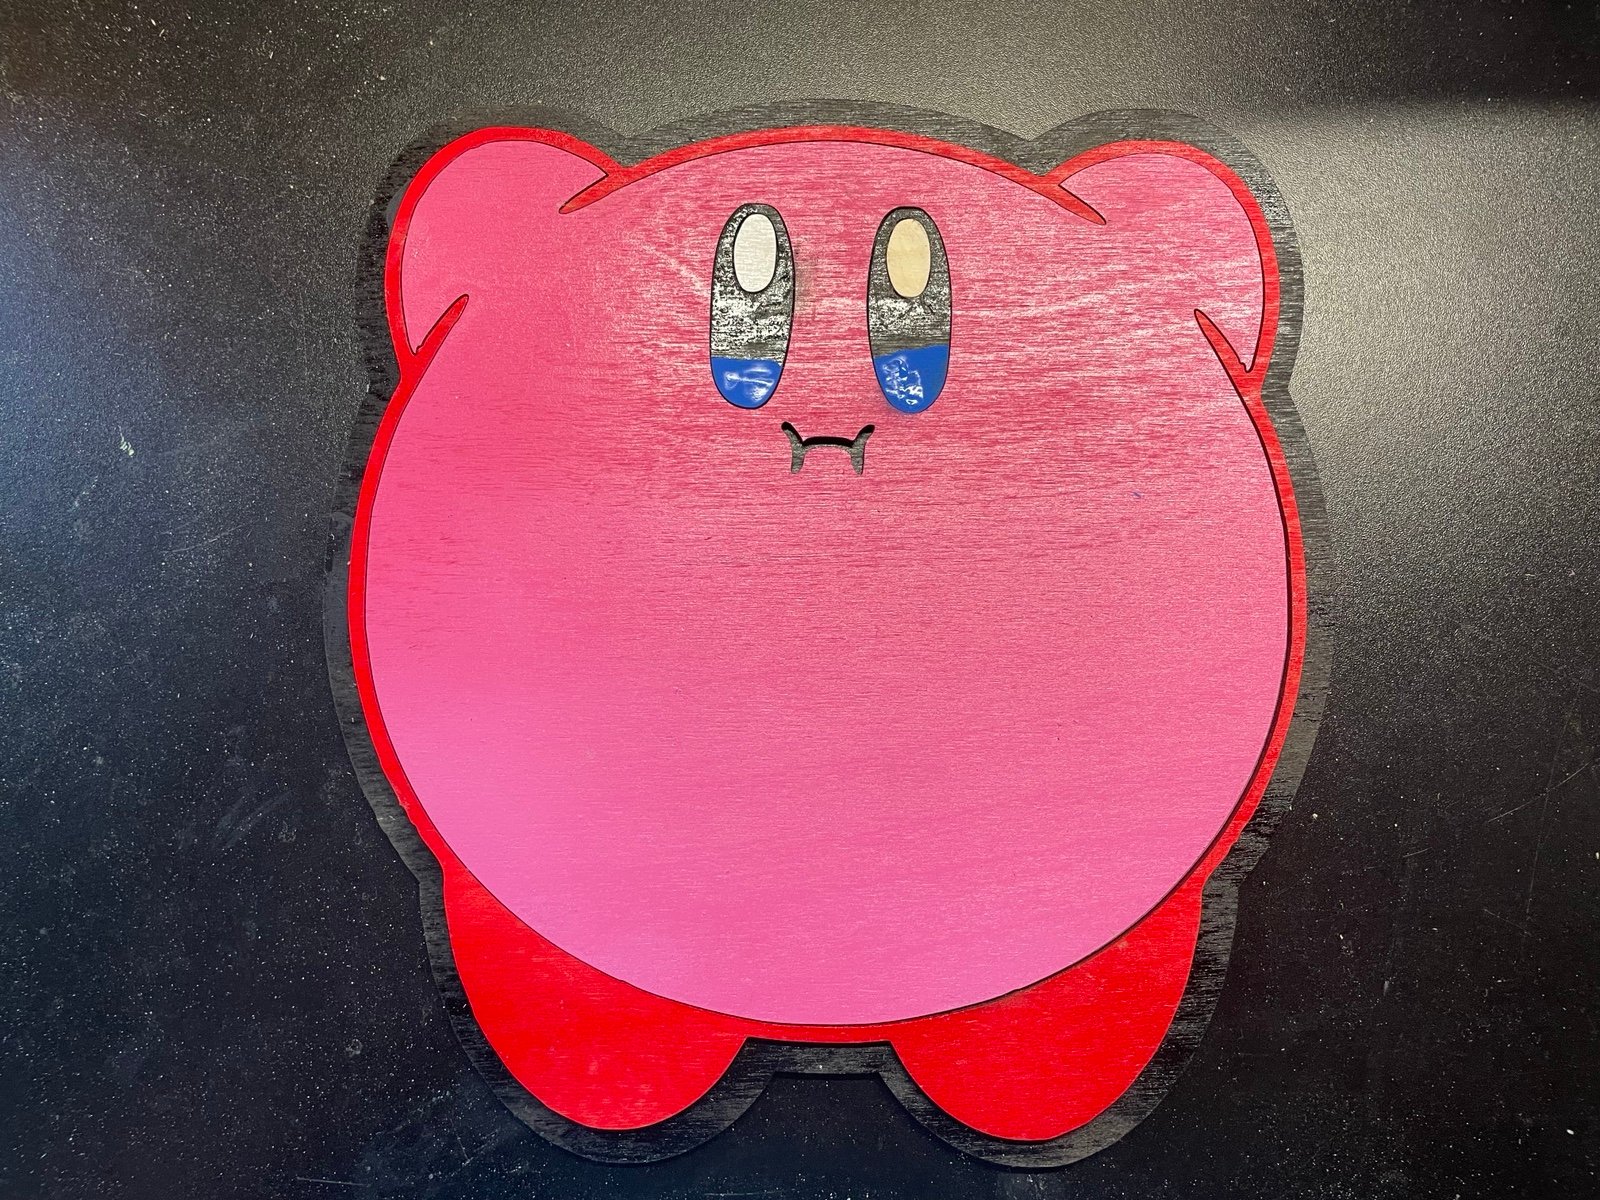 Puffing Kirby Wall Mount pwRpsjWv6